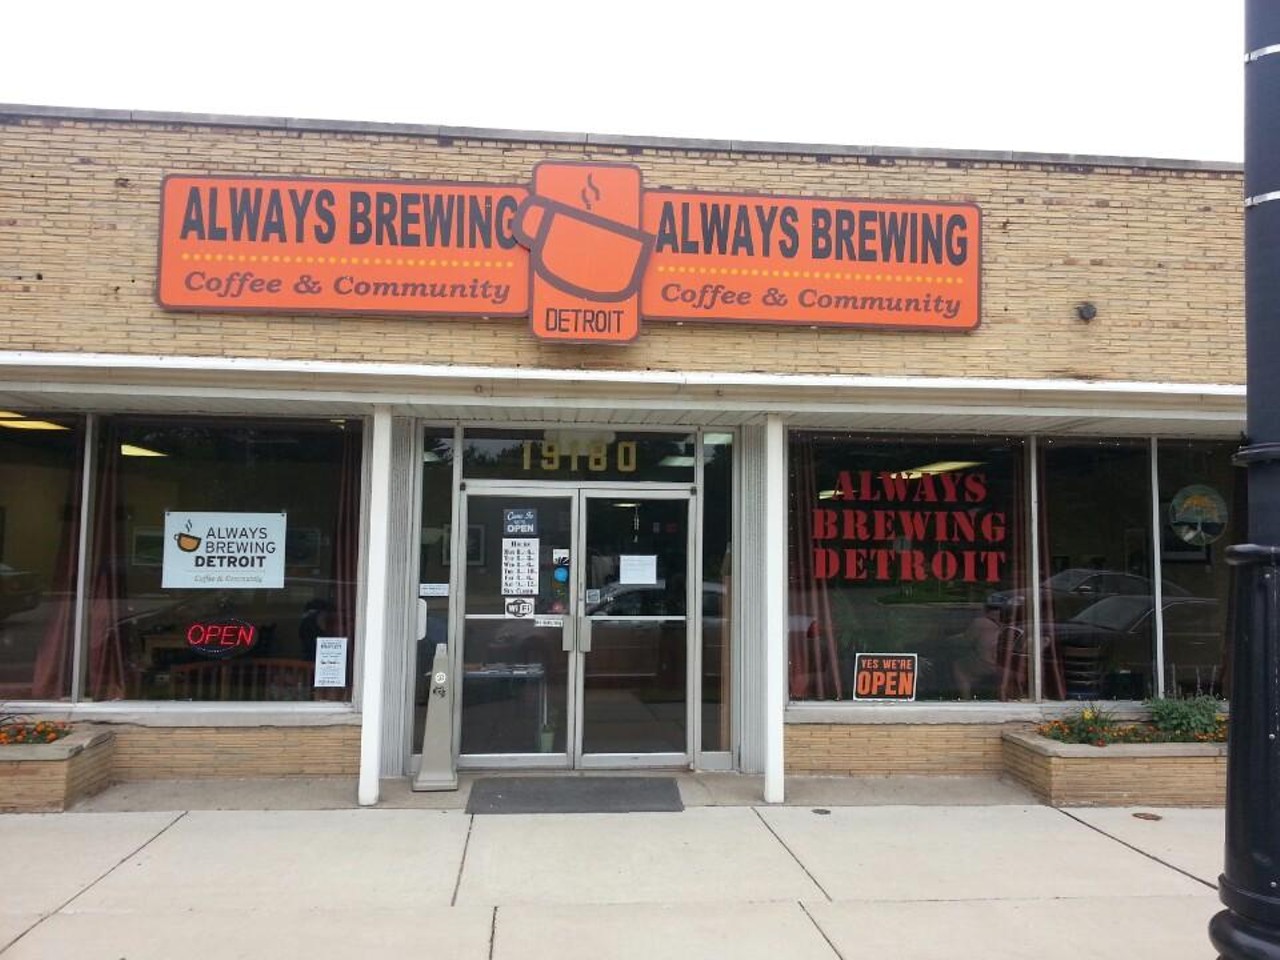 Always Brewing - 19180 Grand River, Detroit
An inviting storefront in Northwest Detroit that goes above and beyond their motto of &#147;coffee and community&#148; to make a mean cup of cocoa.